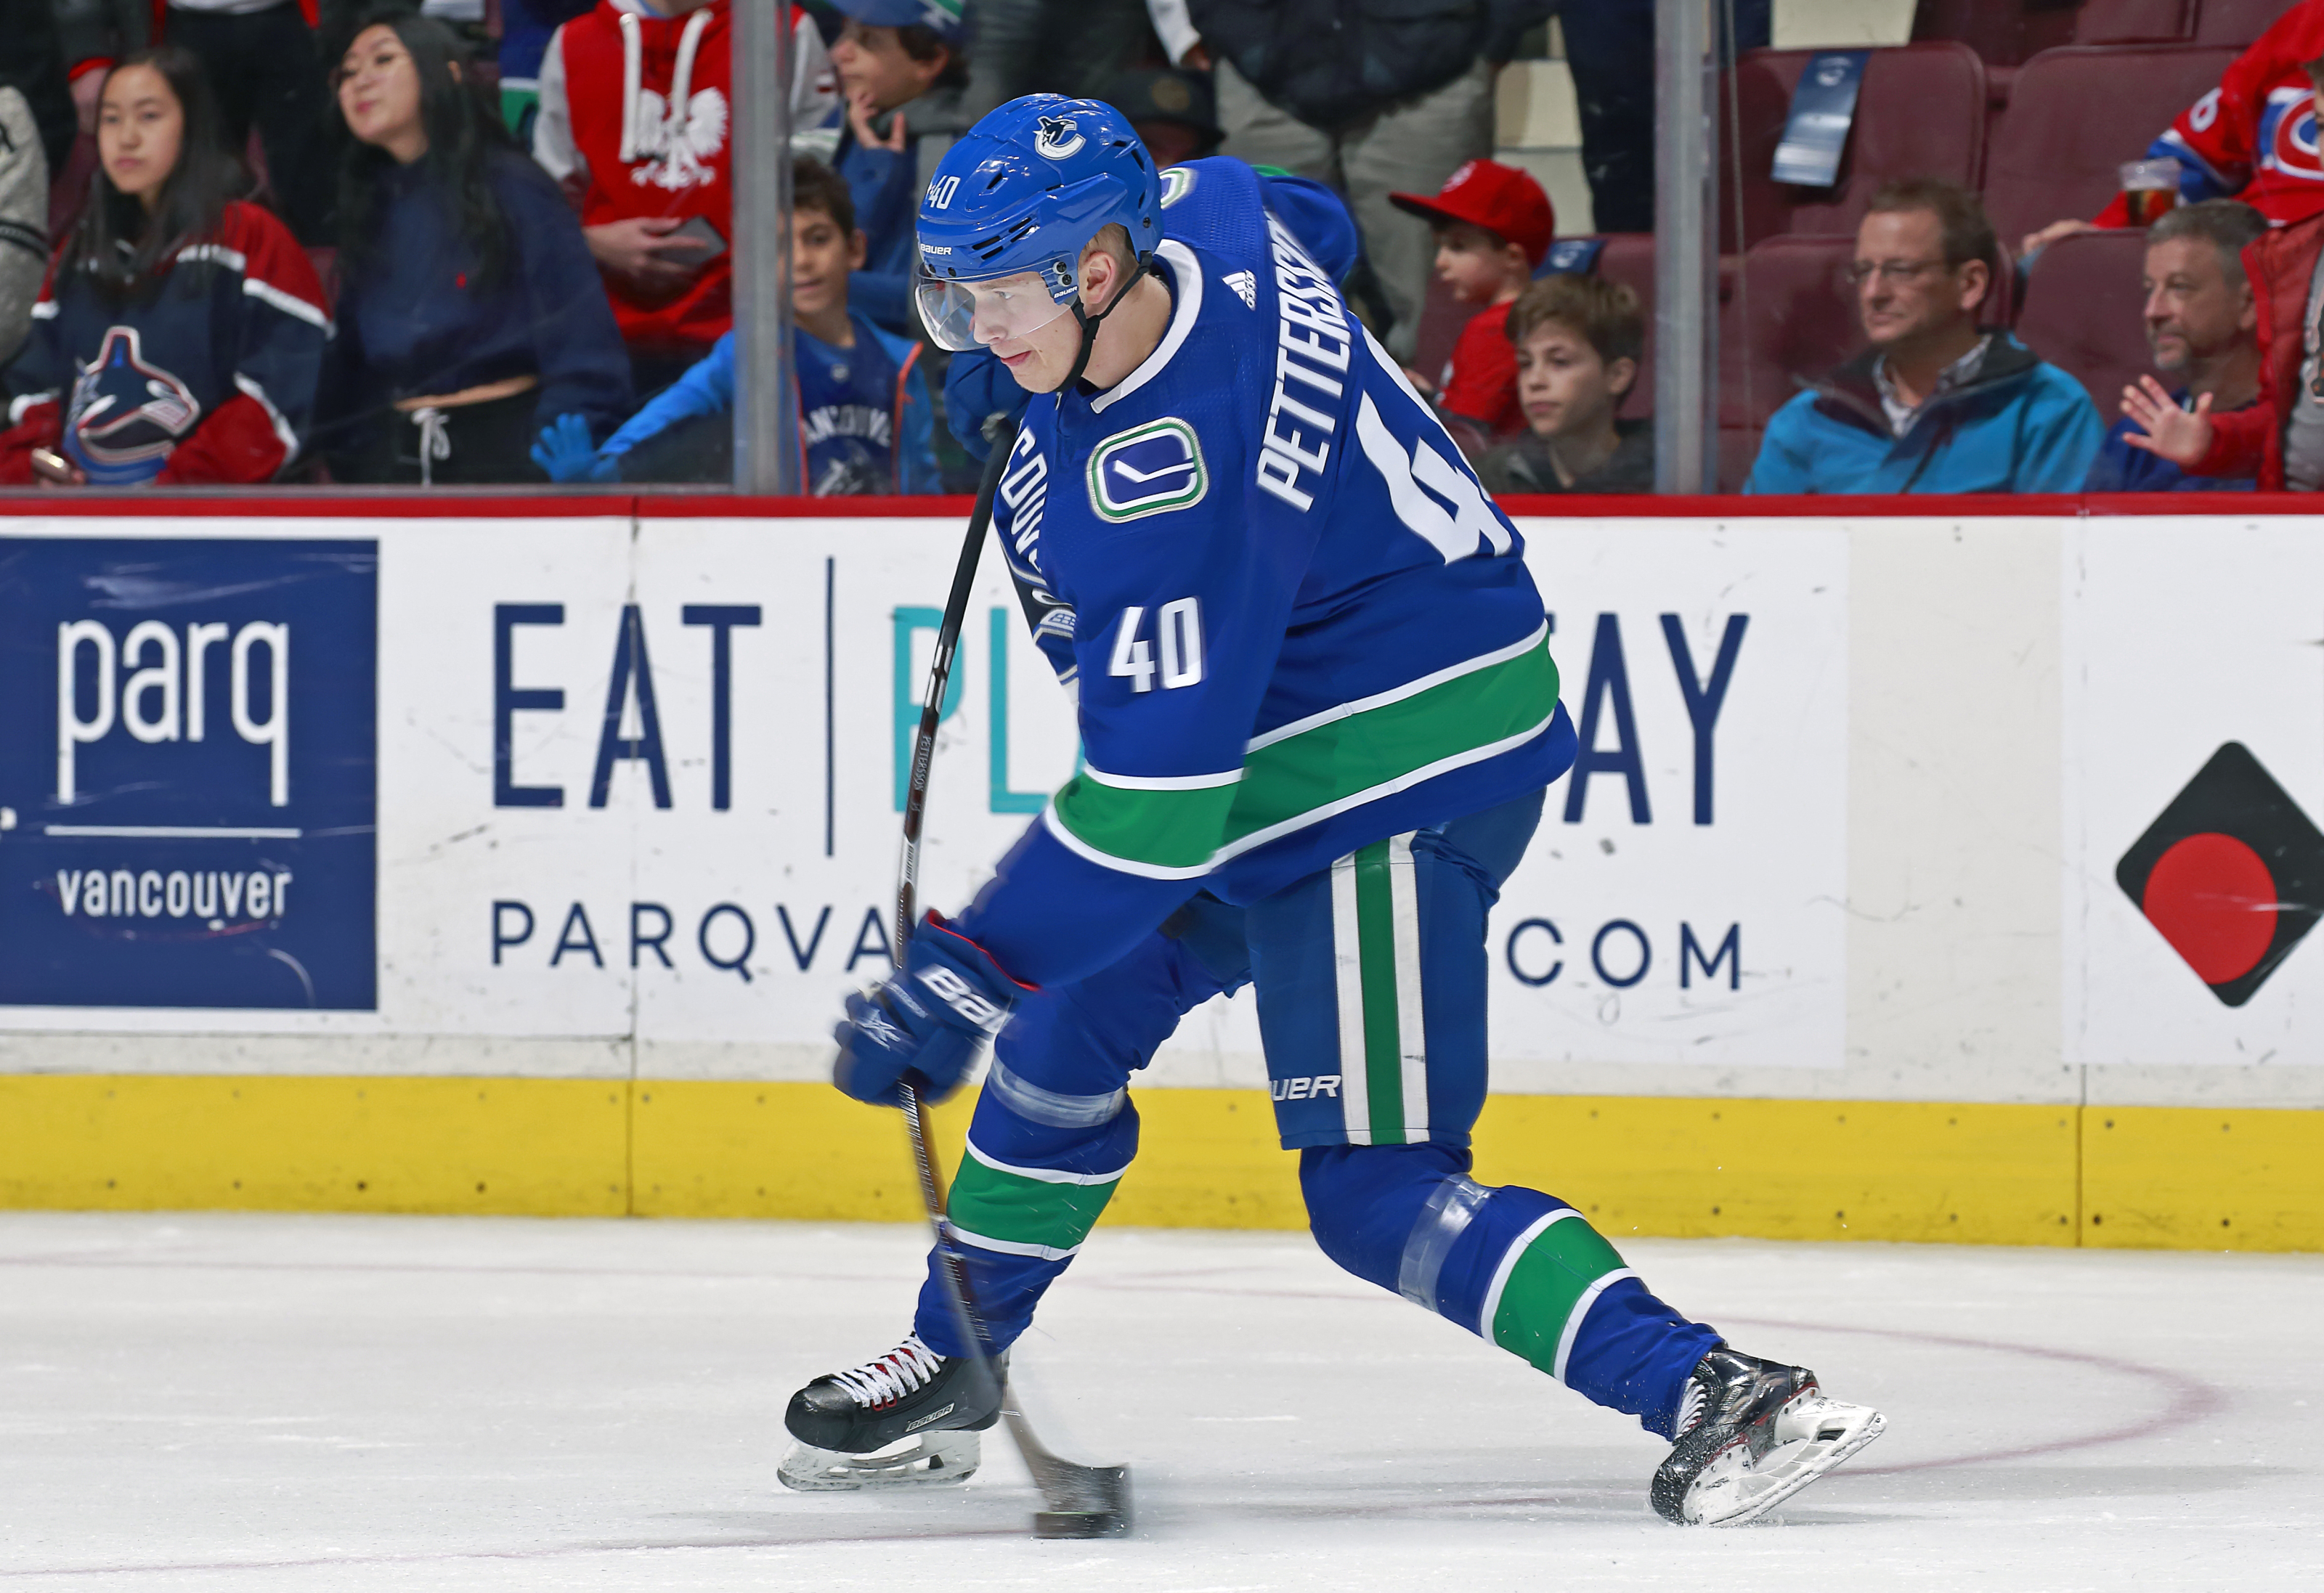 Vancouver Canucks Elias Pettersson National Day for Truth and